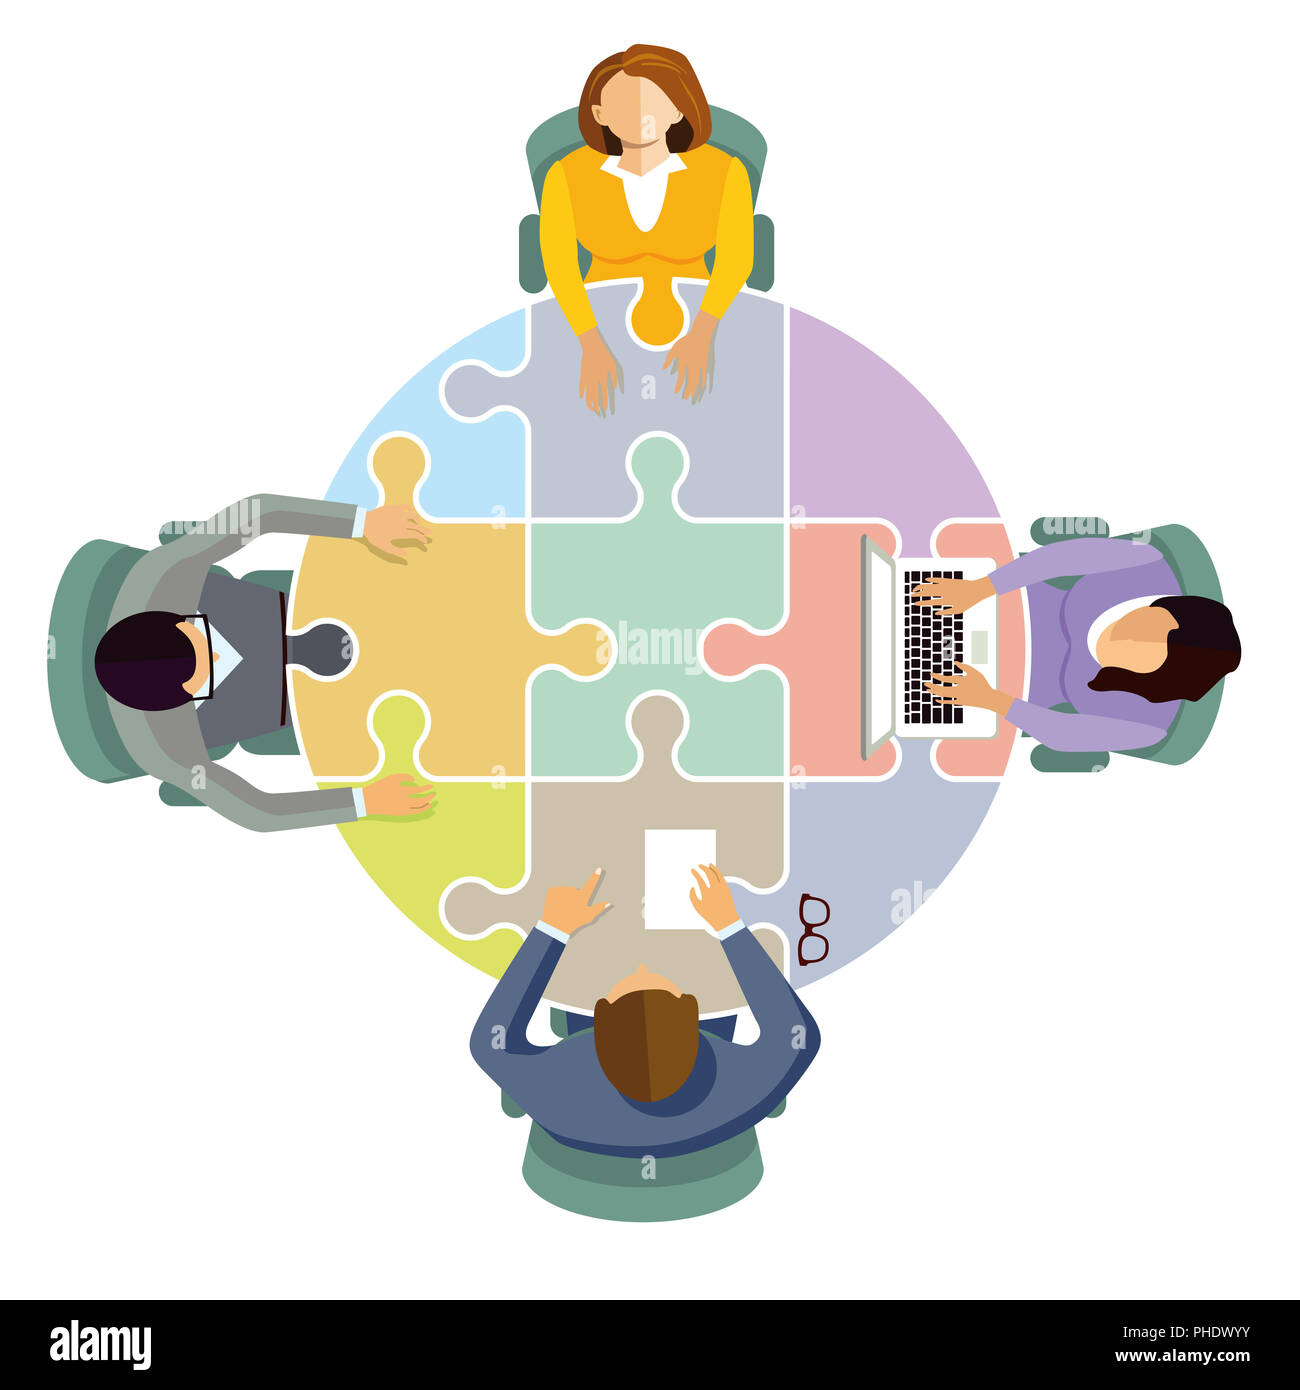 Team collaboration and connect, illustration Stock Photo